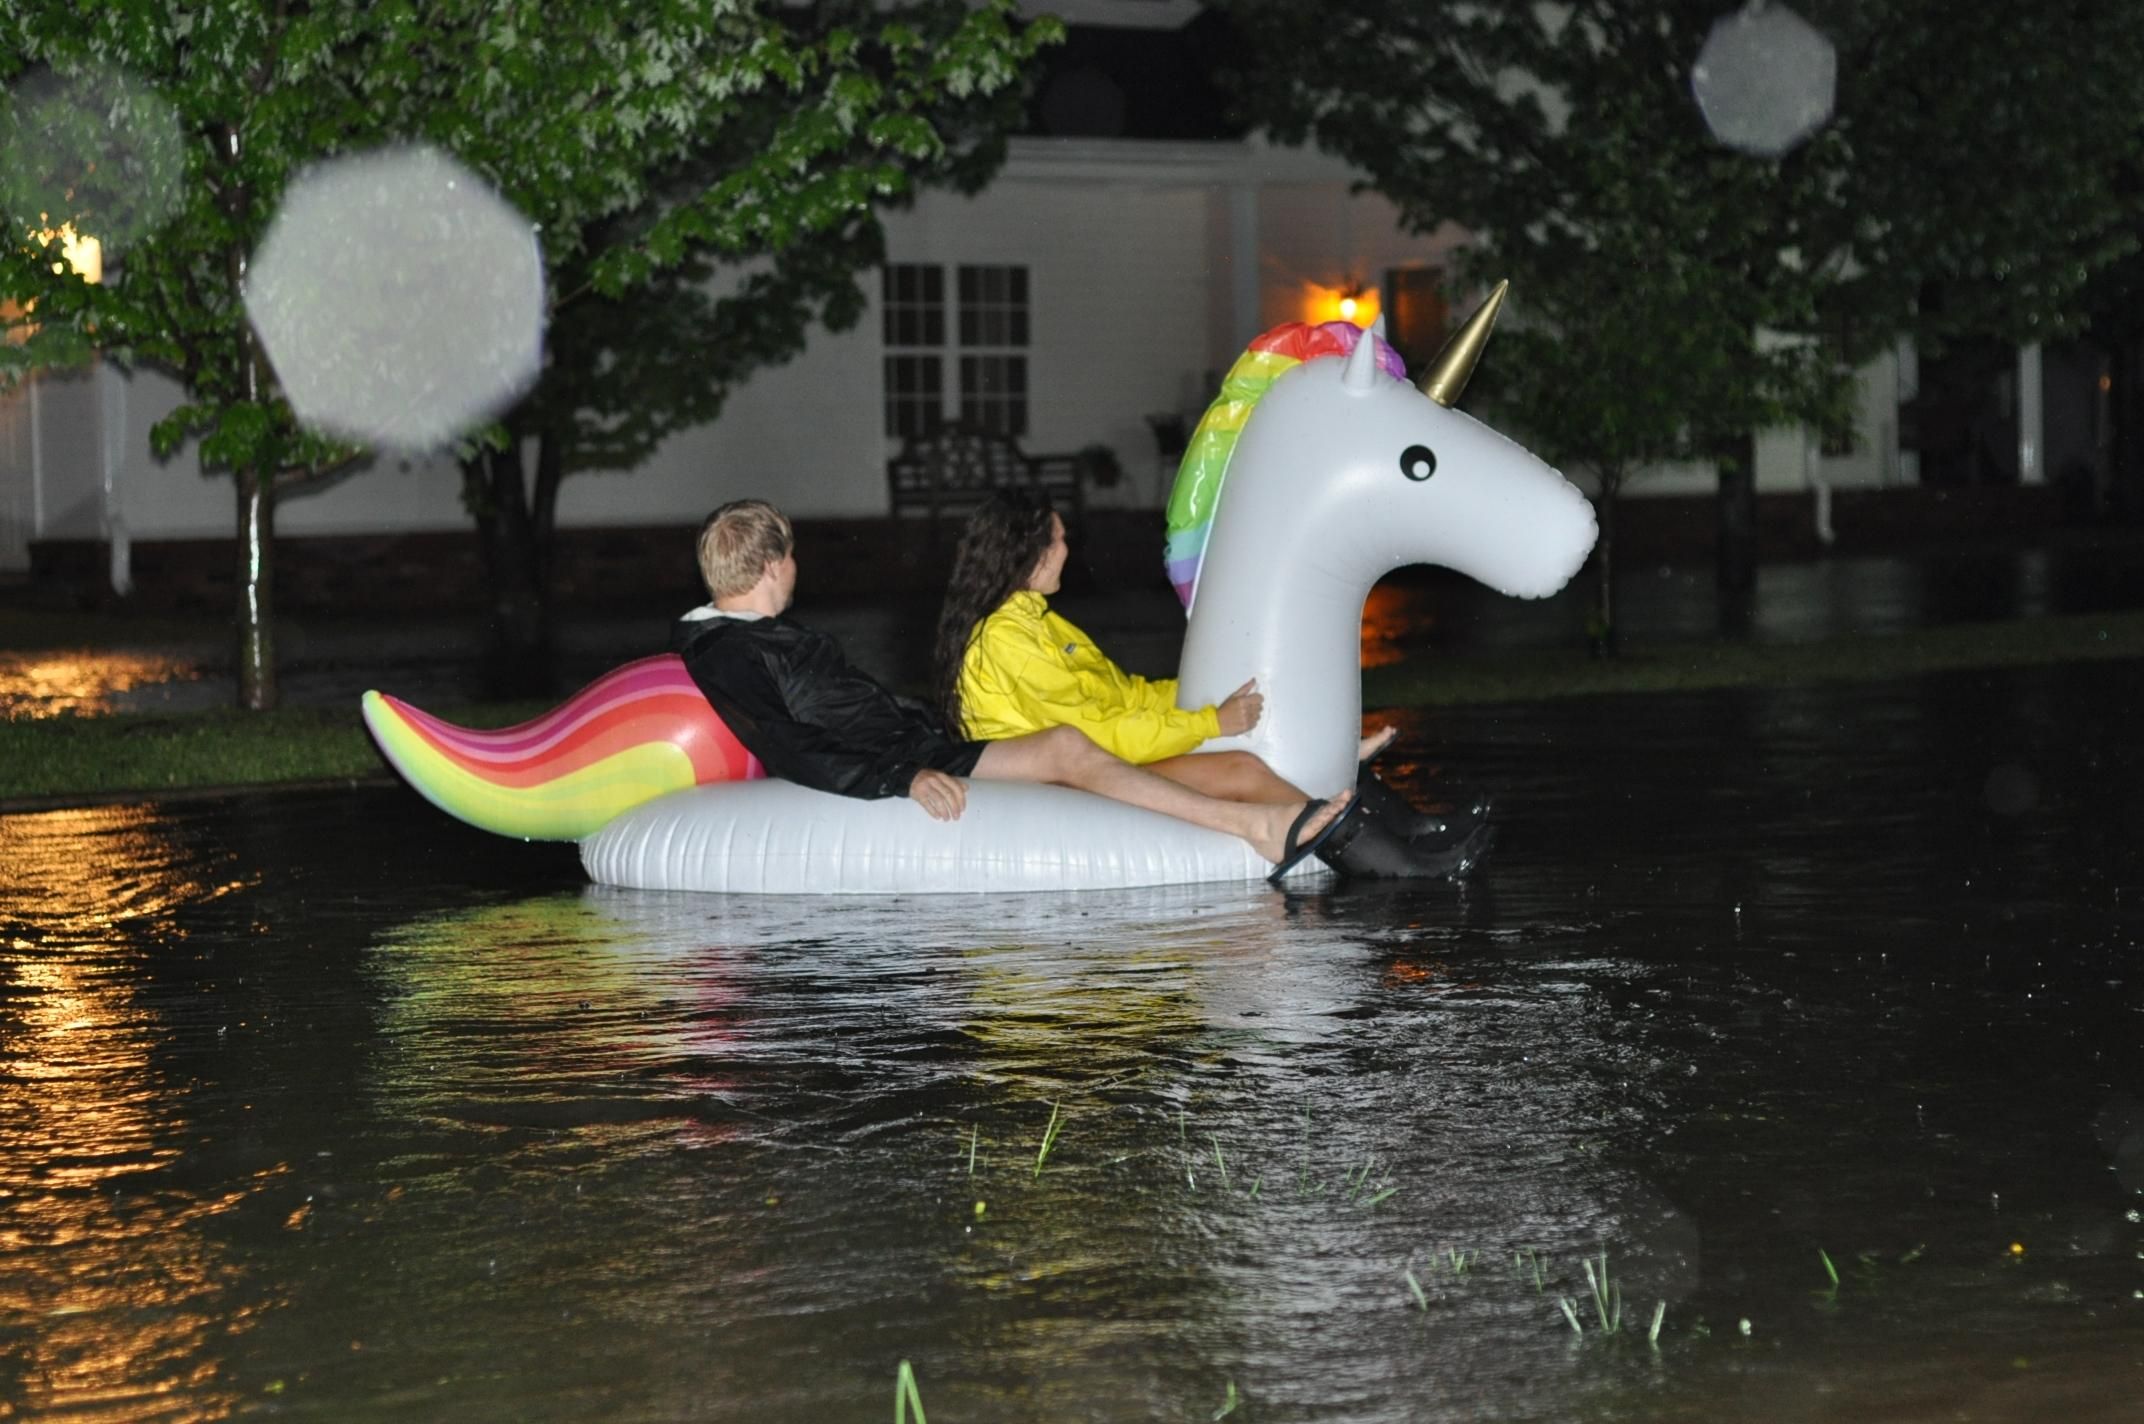 I live in Fayetteville, AR where we are currently getting record flooding. So naturally, my neighbors rode their unicorn through the streets.